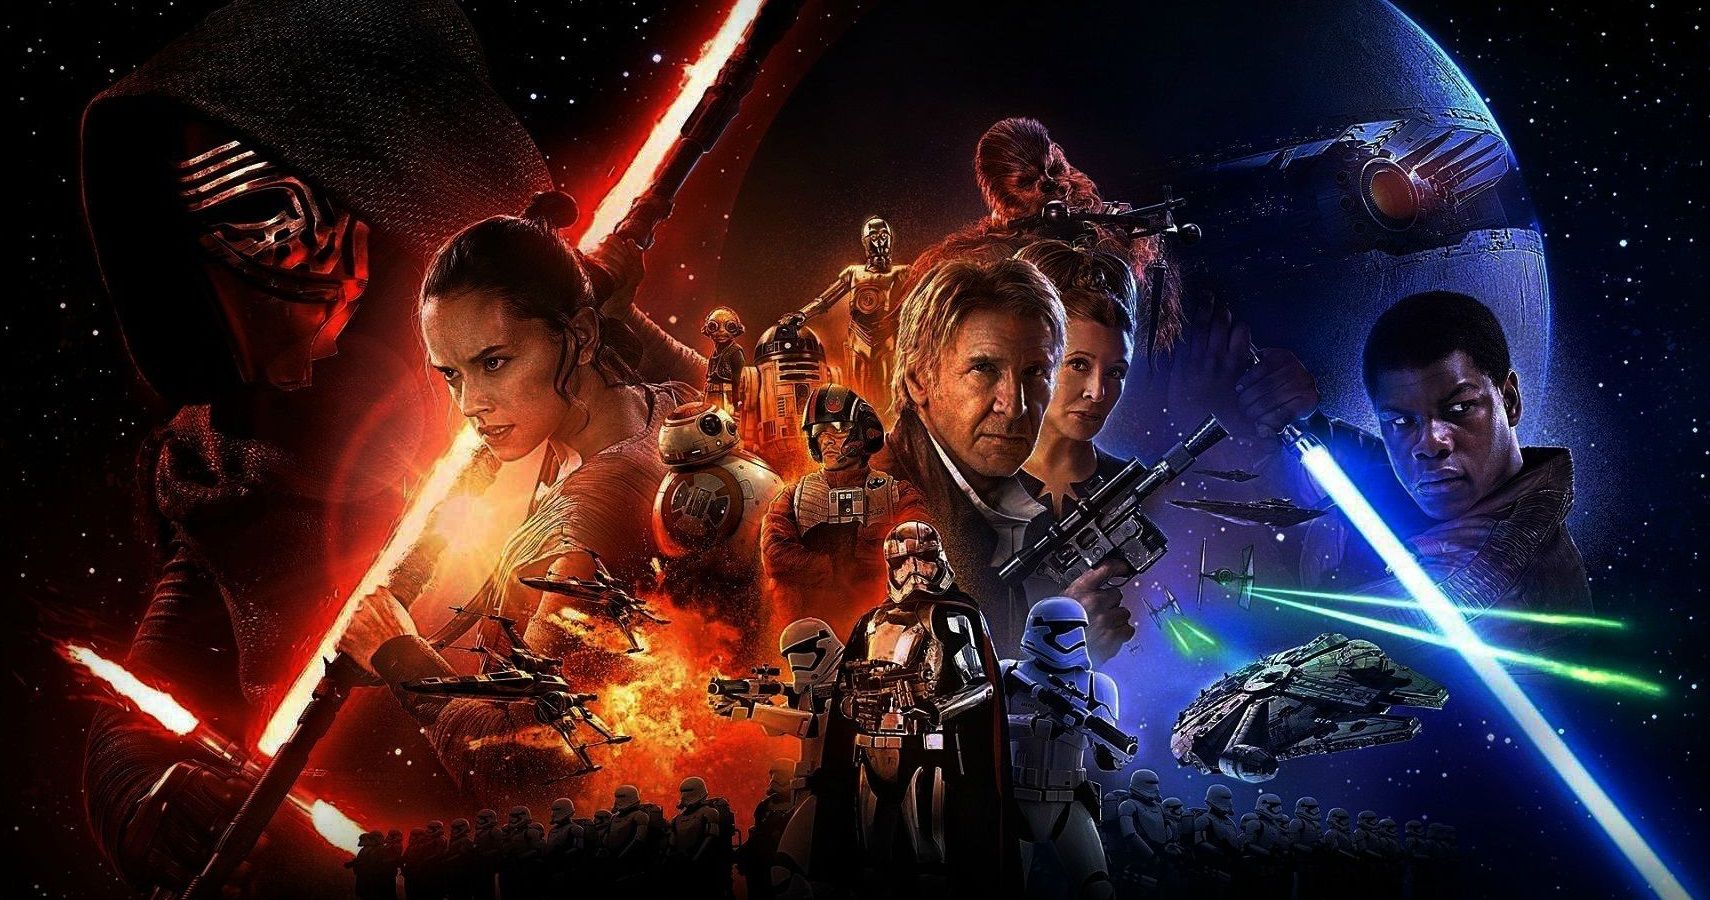 How Well Do You Know Star Wars: The Force Awakens?